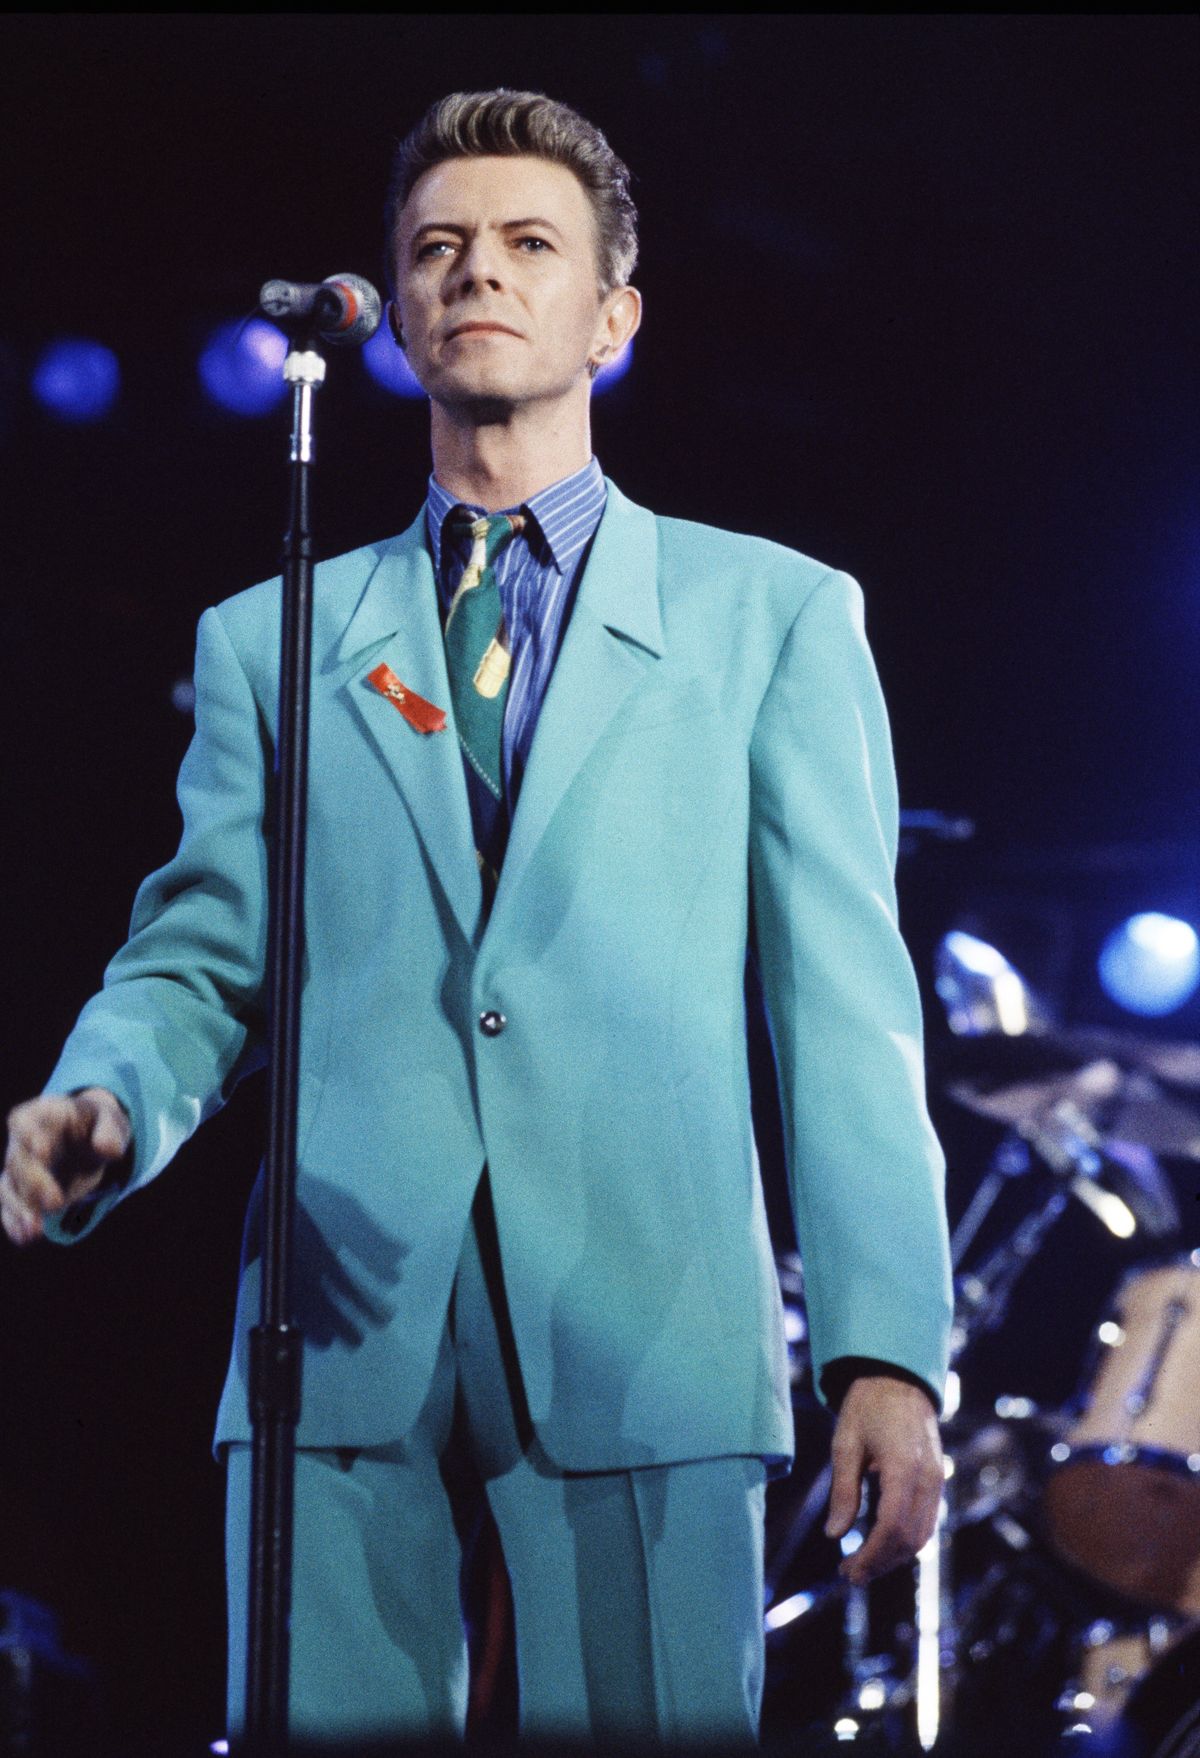 david bowie performs on stage at the freddie mercury tribute concert for aids awareness